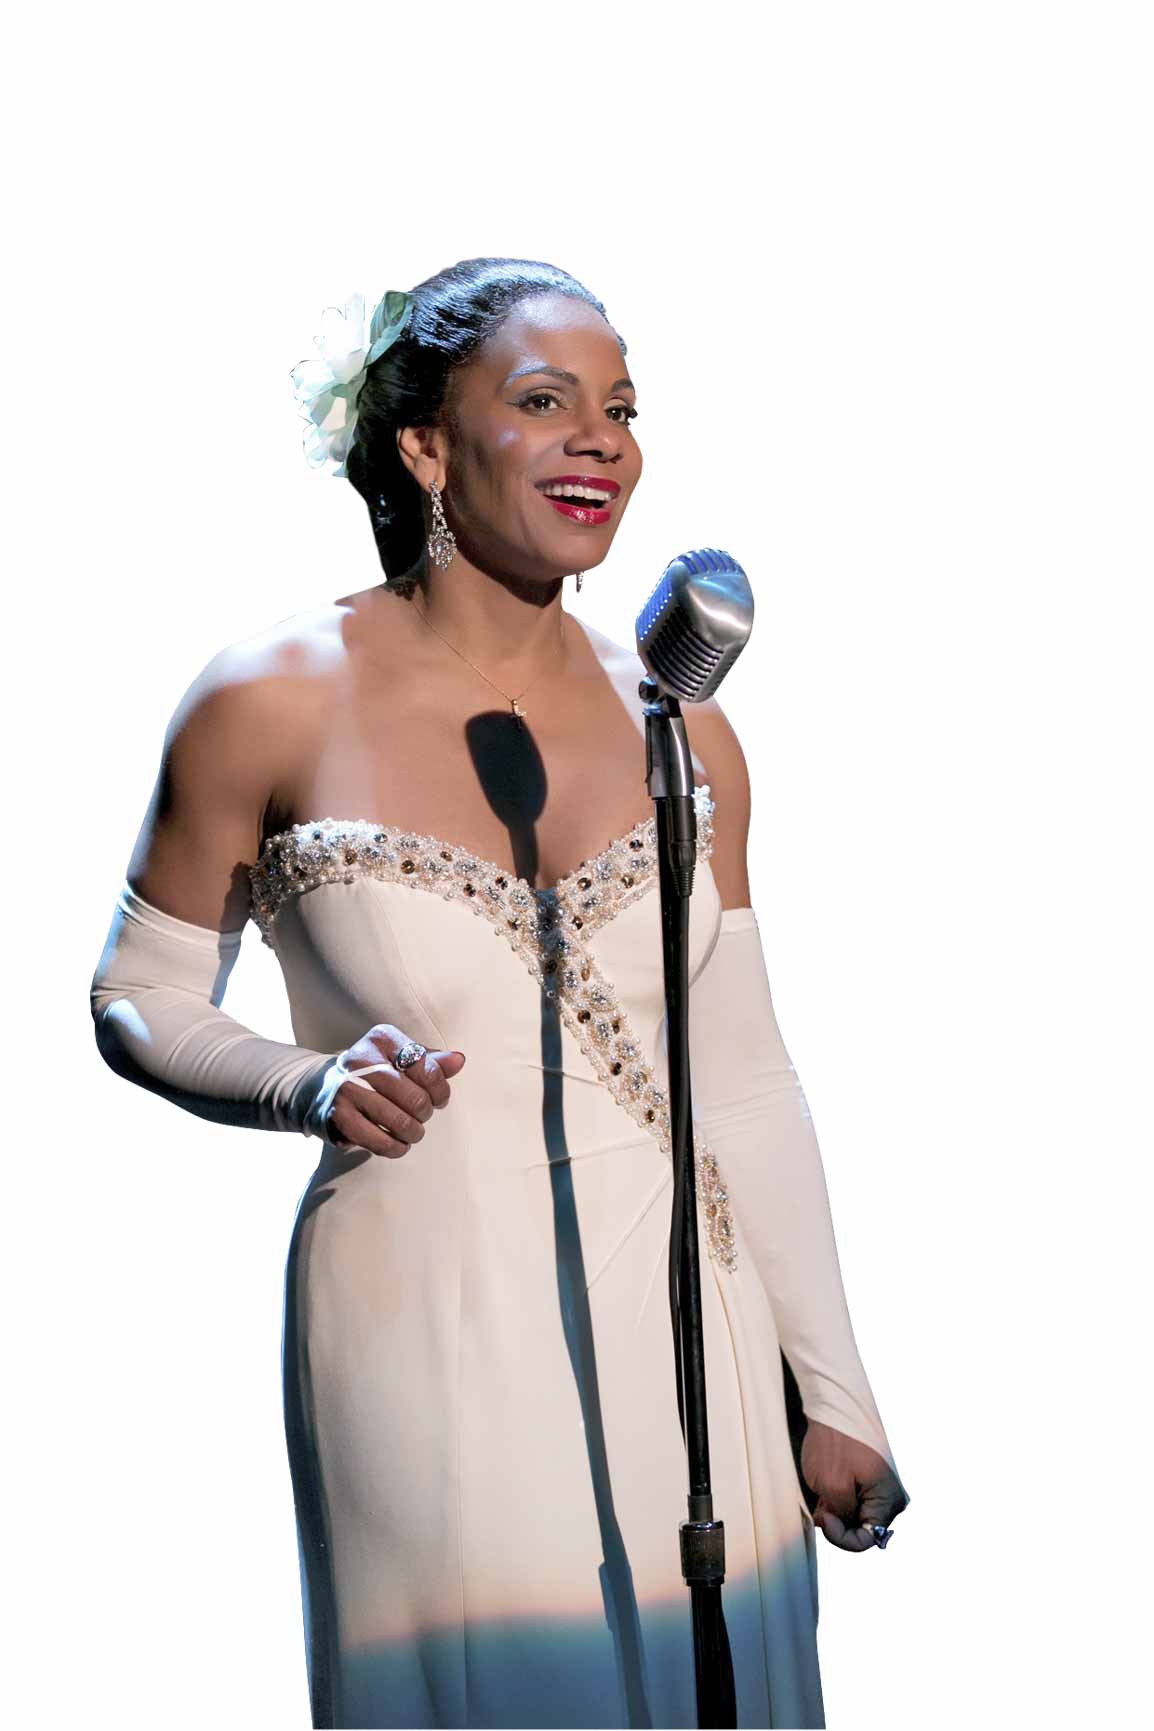 Audra McDonald as Billie Holiday Broadway NYC 2013 Lady Day at Emerson's Bar and Grill